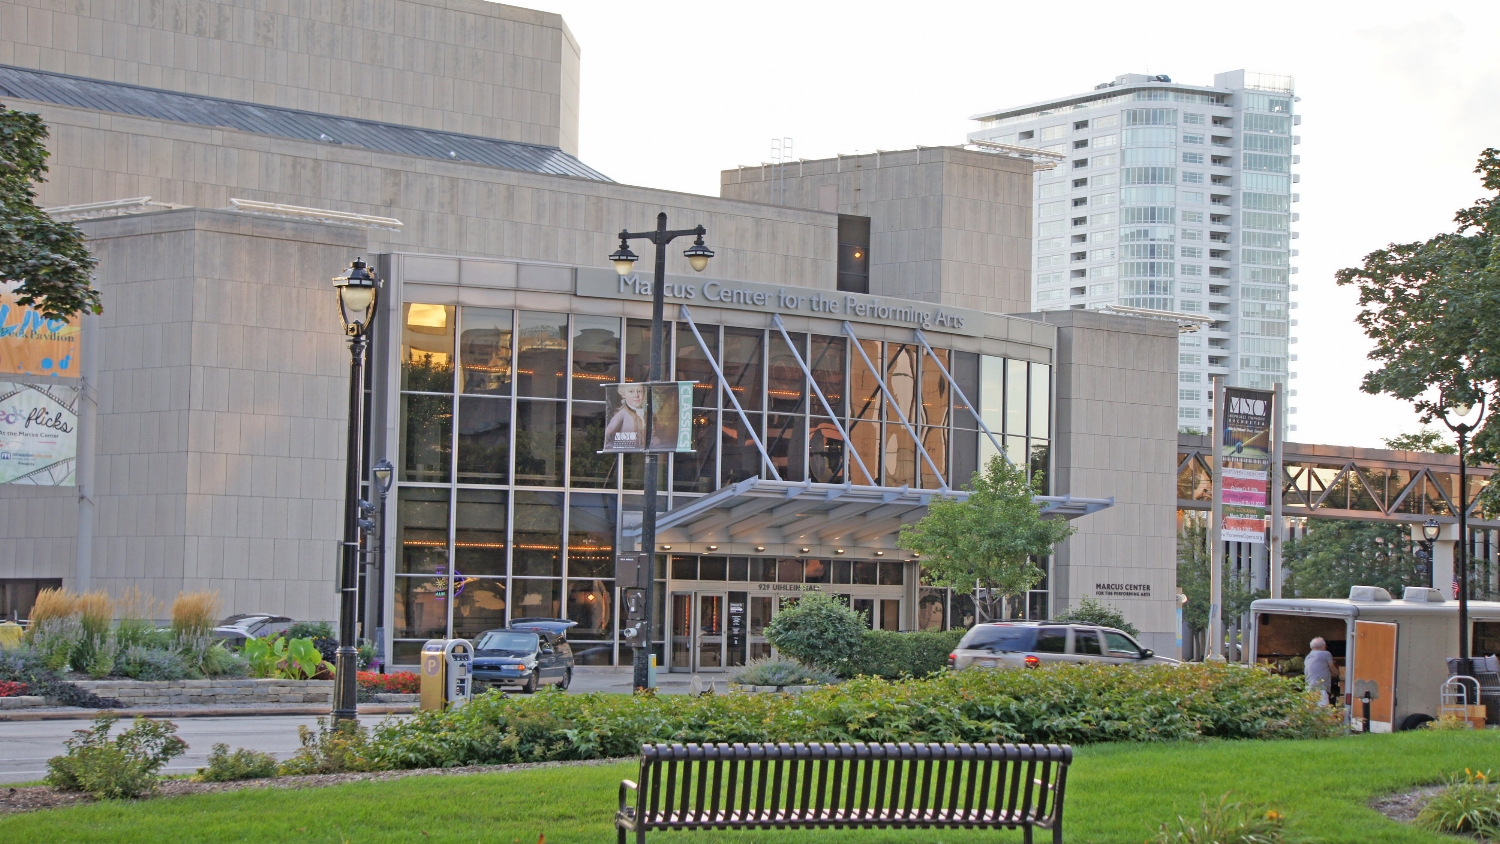 Marcus Center for the Performing Arts